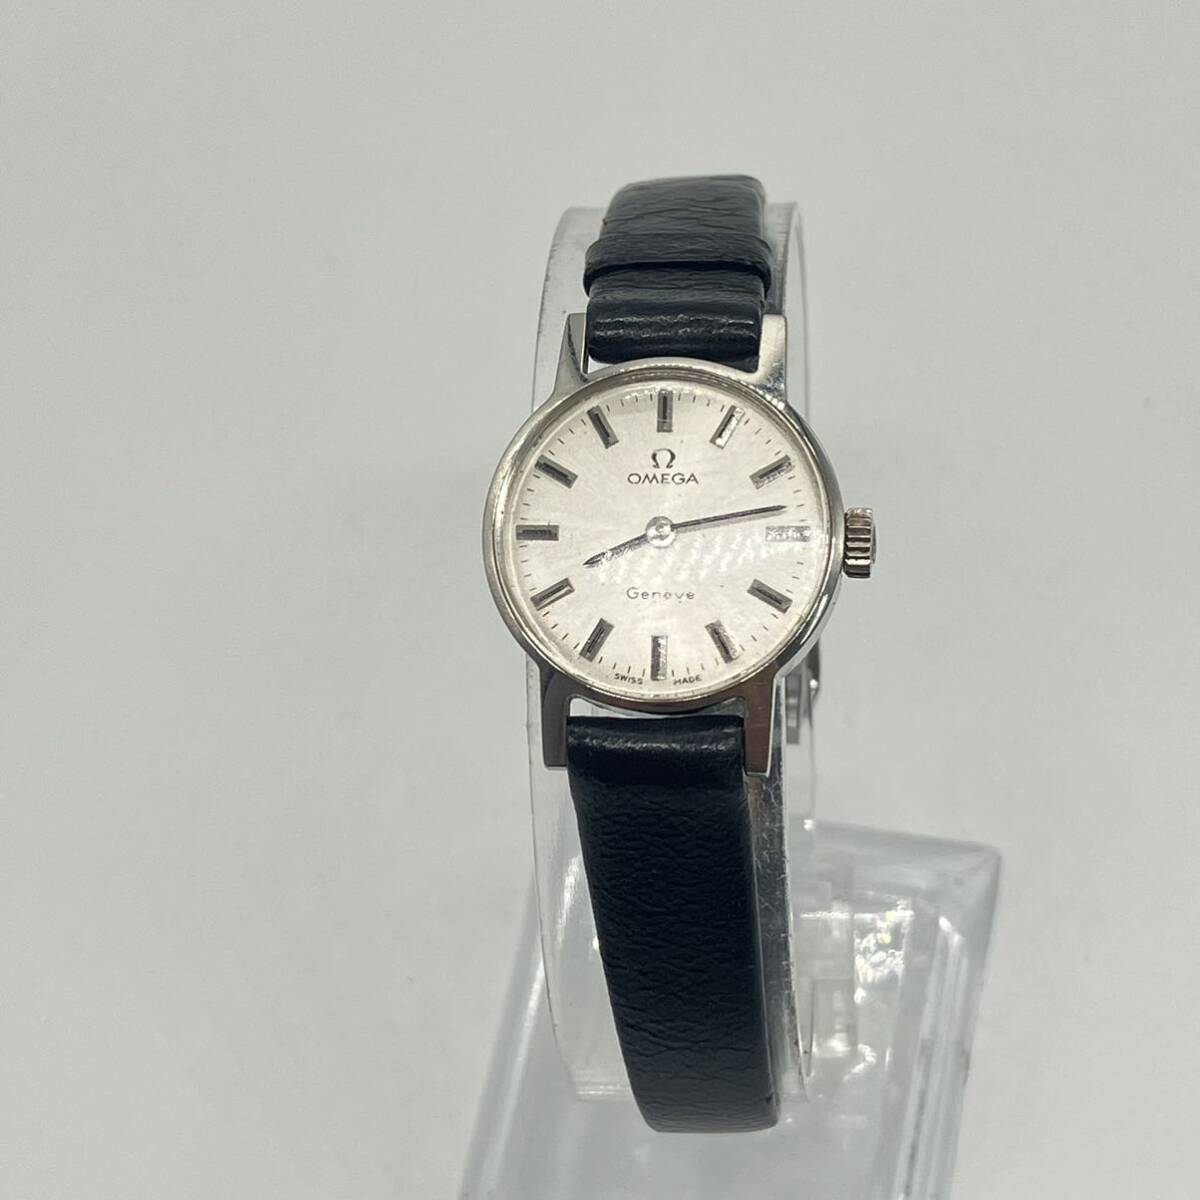 1 jpy ~ 4* OMEGA Omega wristwatch hand winding wristwatch operation verification ending june-b belt crack equipped hand winding Vintage silver face operation goods 